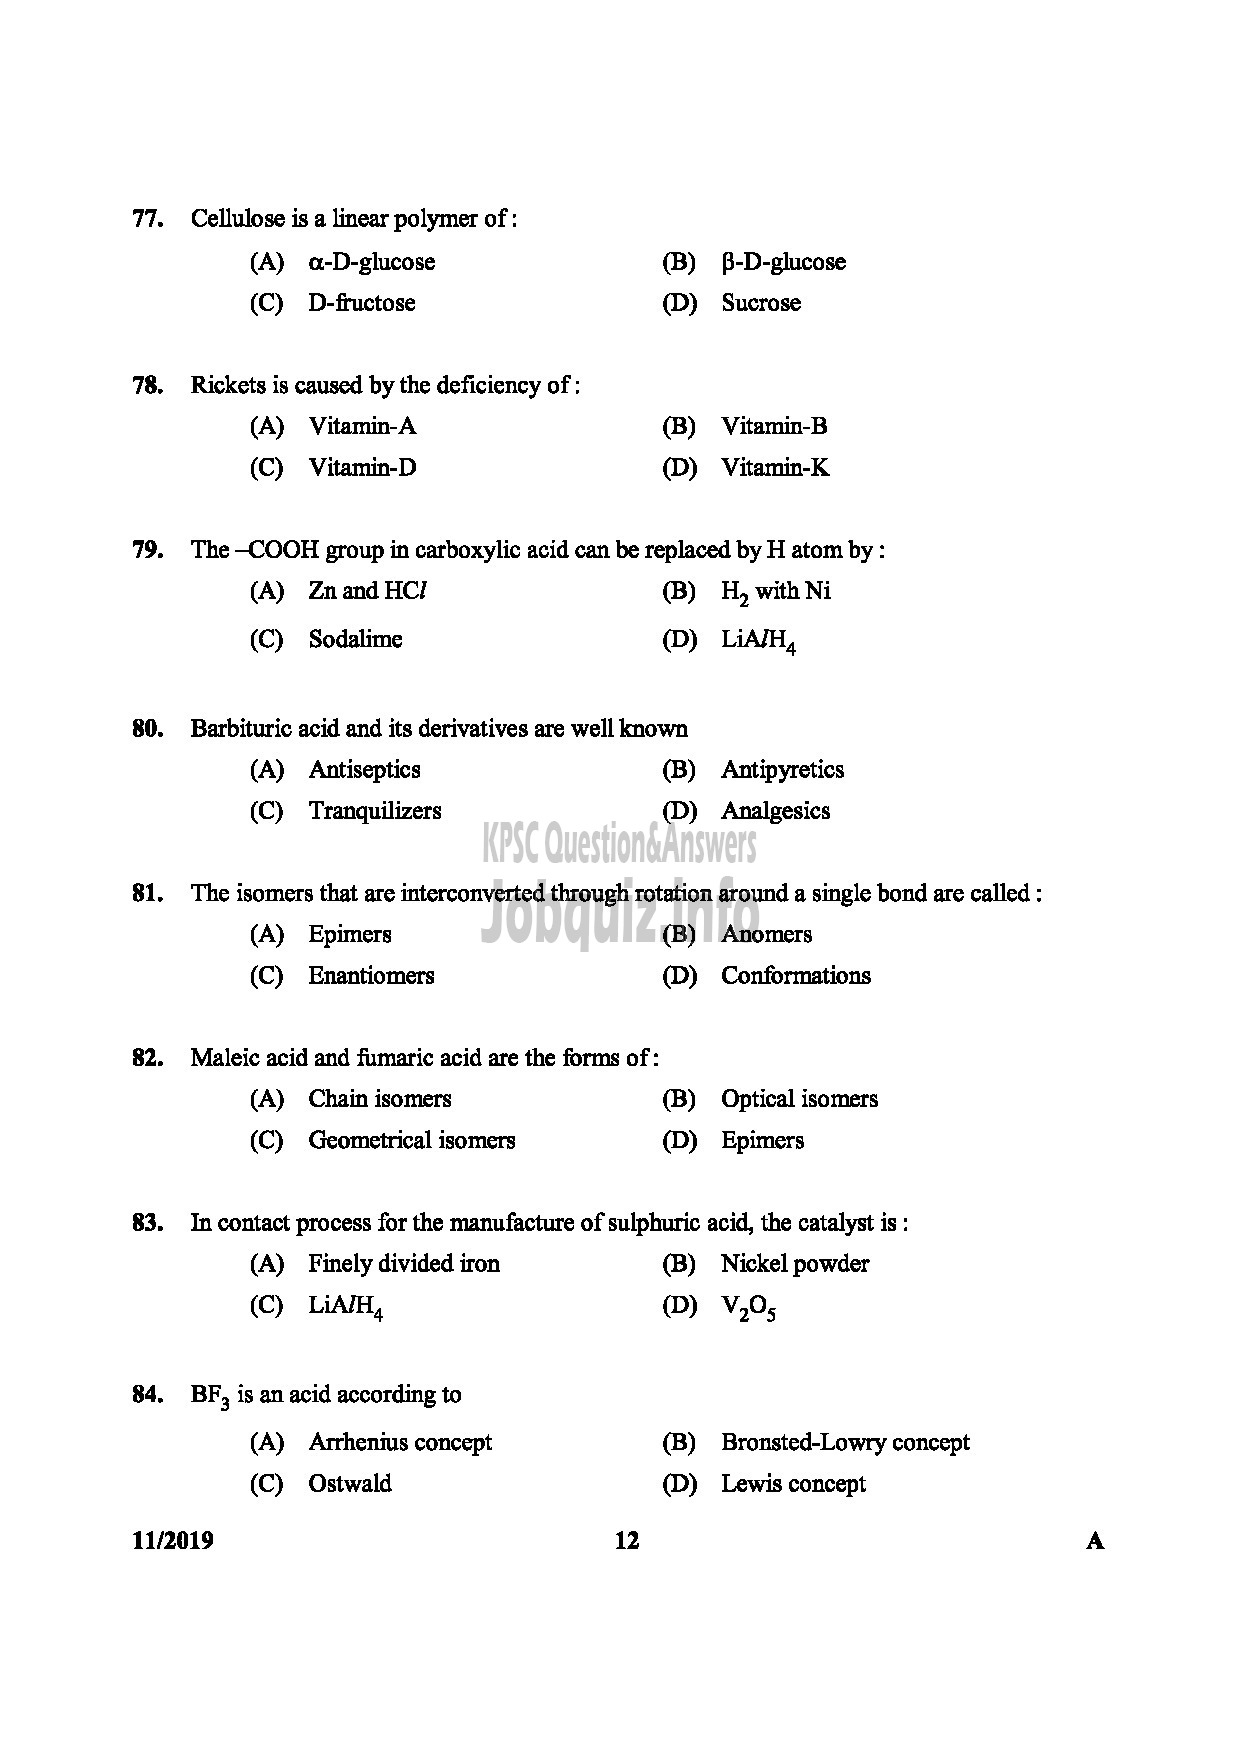 Kerala PSC Question Paper - SANITARY CHEMIST KERALA WATER AUTHORITY TECHNICAL ASSISTANT CHEMICAL EXAMINERS LABORATORY LAB ASSISTANT-12